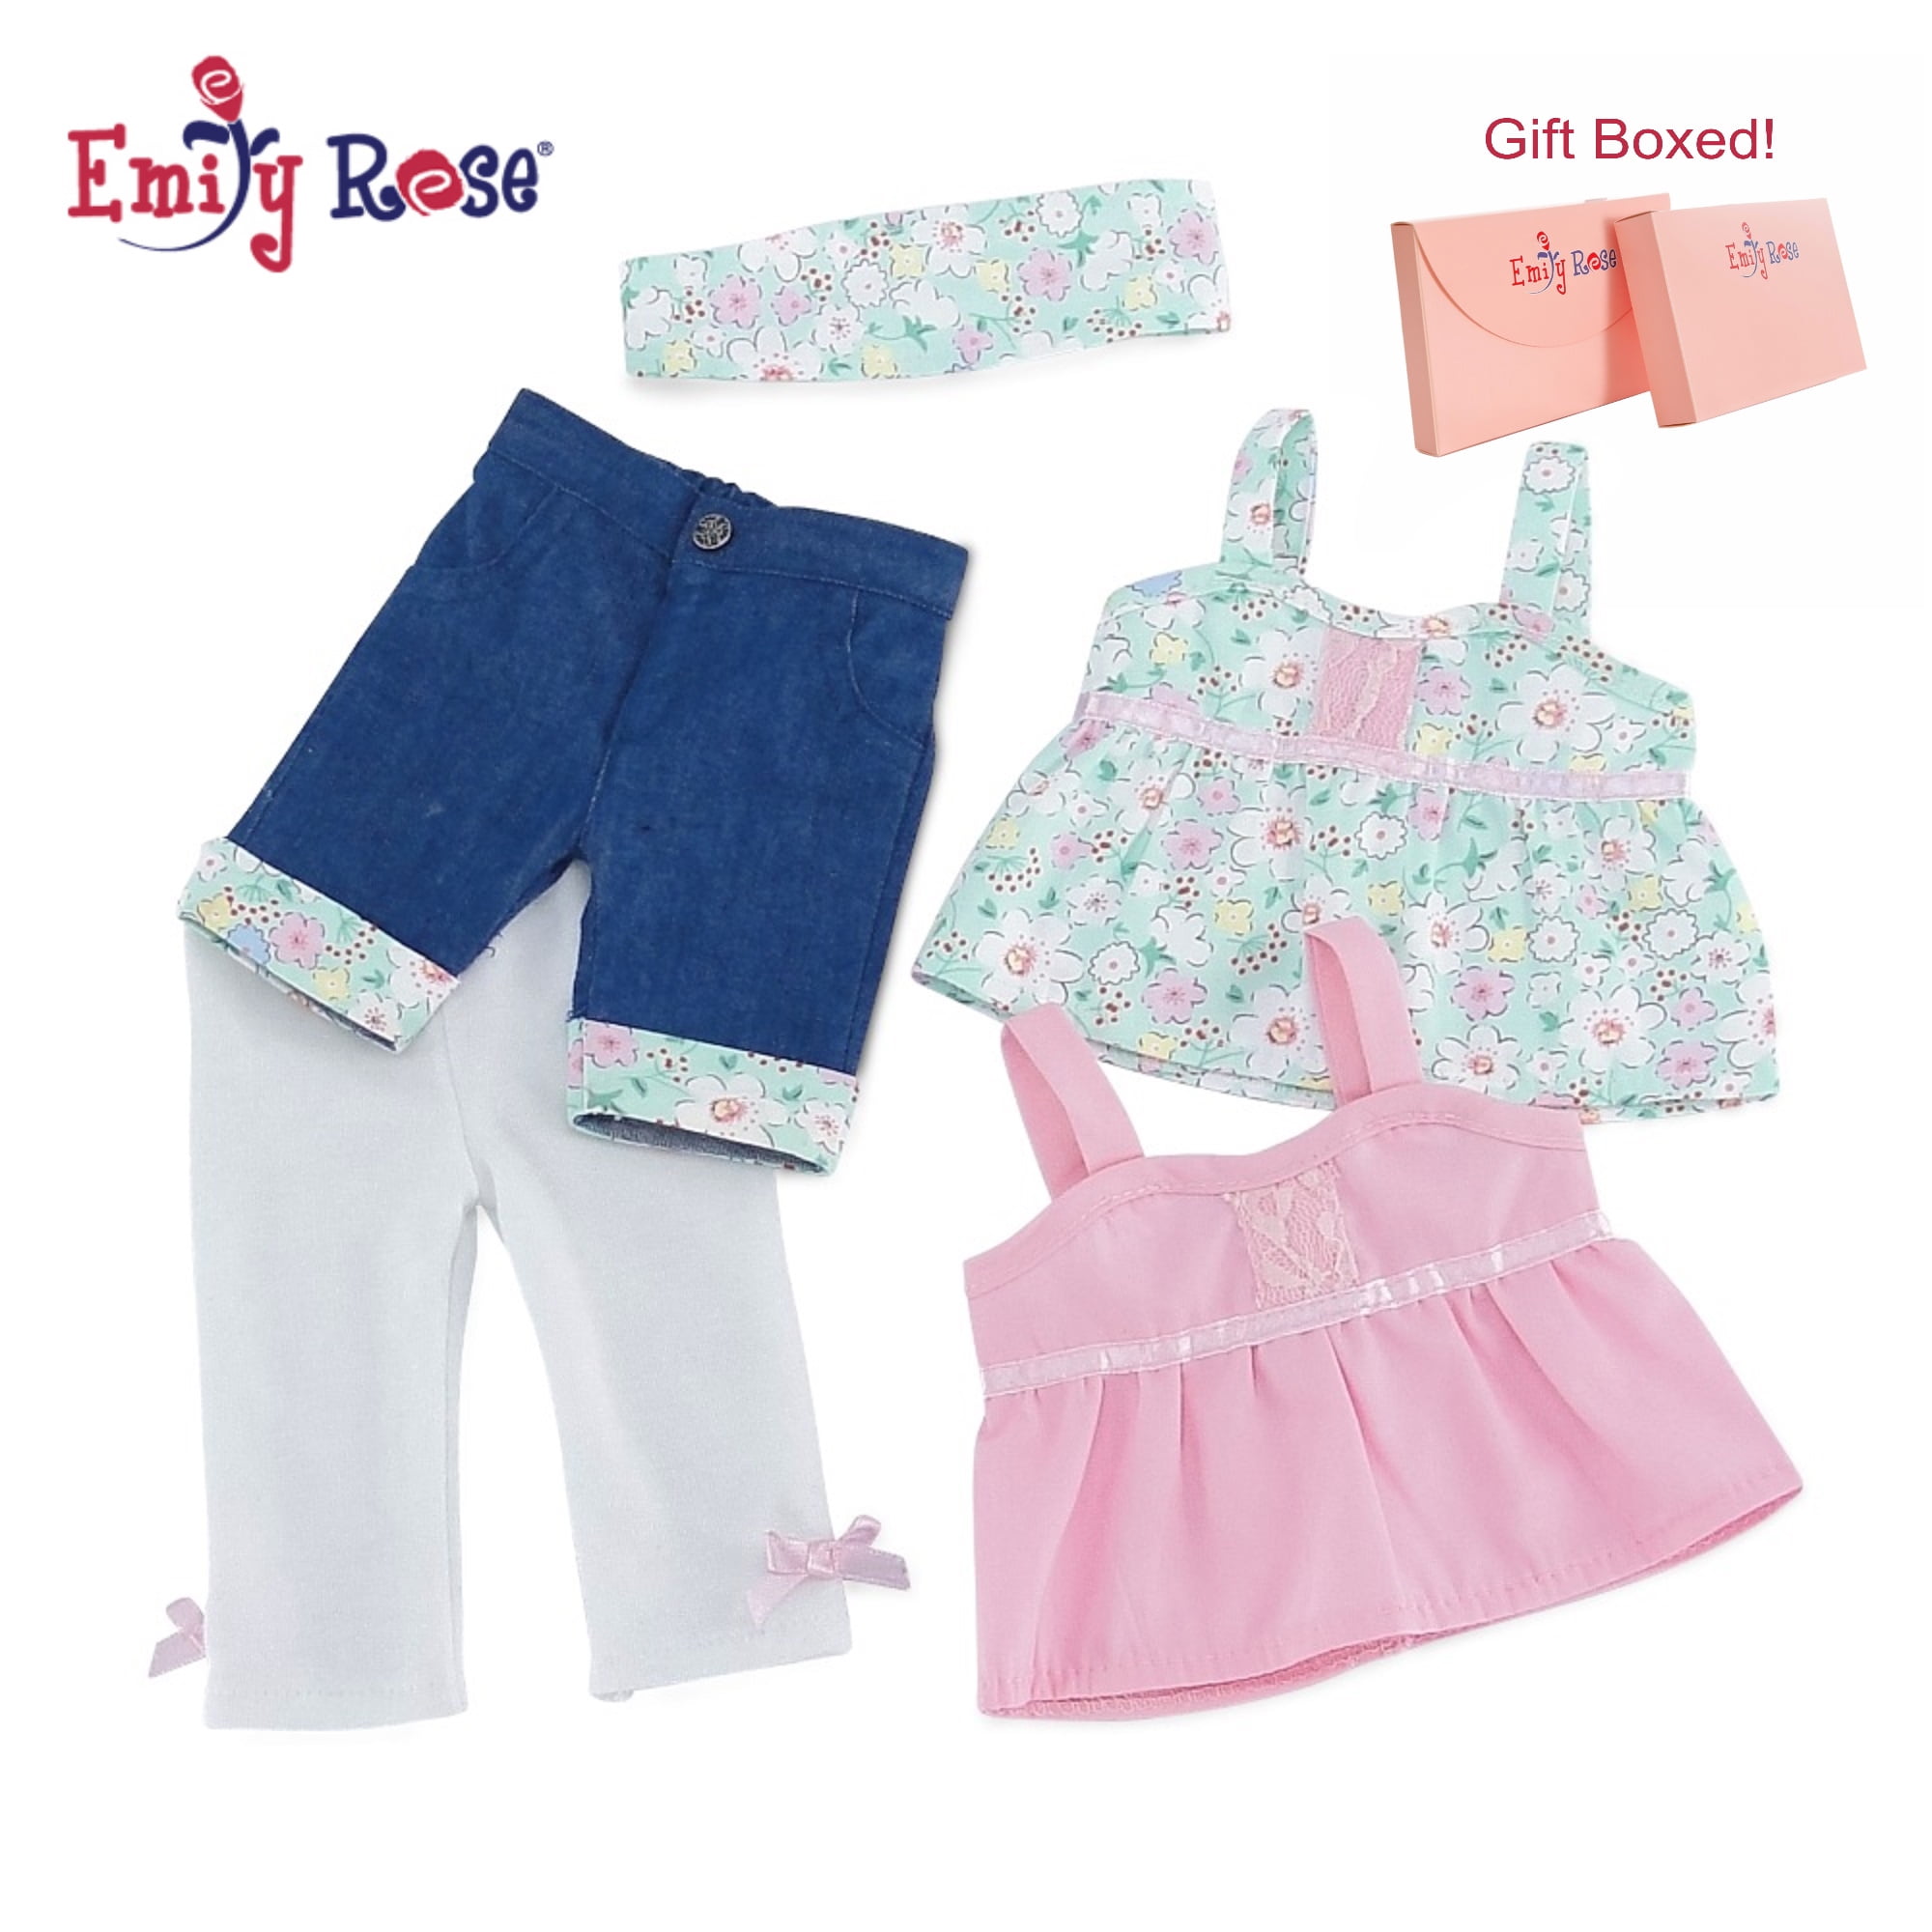 18 inch doll clothes matching girl outfits